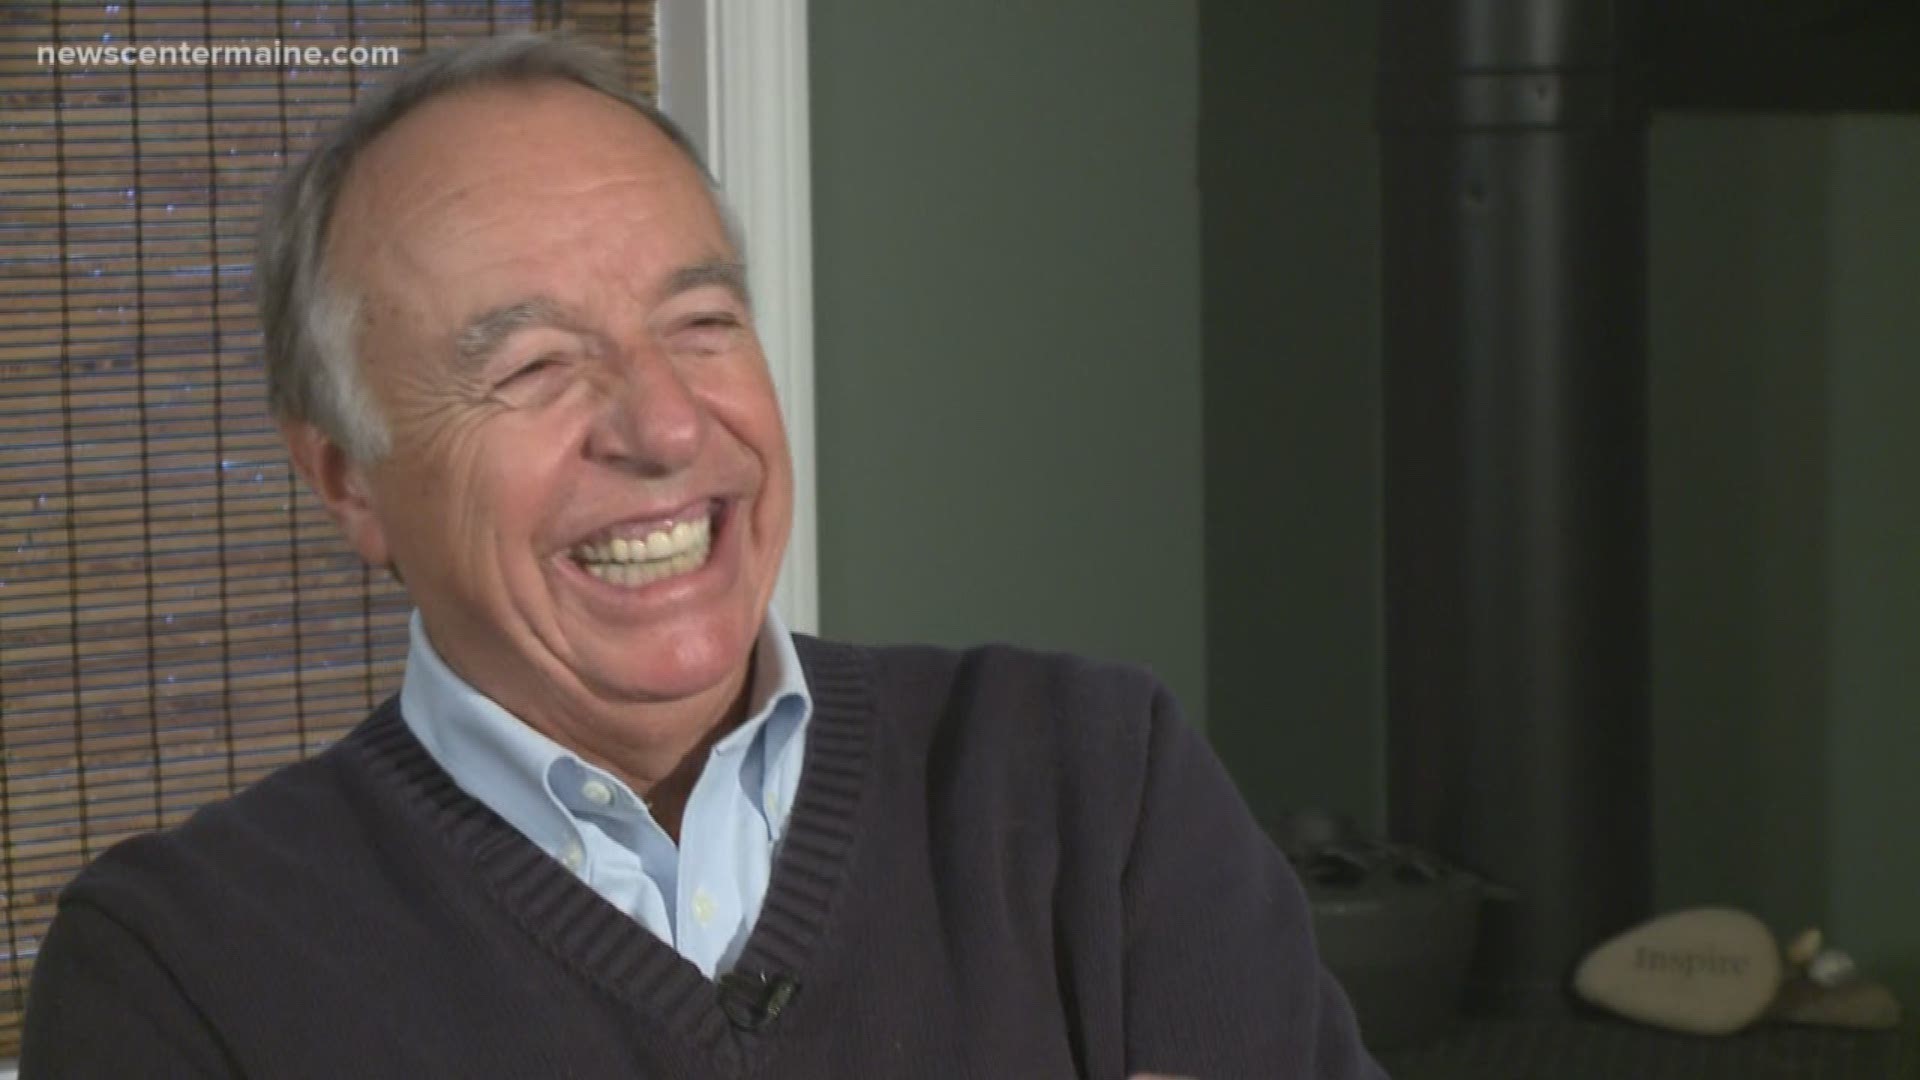 "It ain't that it ain't funny, you just don't get it!" Mainer Tim Sample has been making people laugh for 40 years. He argues Maine humor really hasn't changed much.